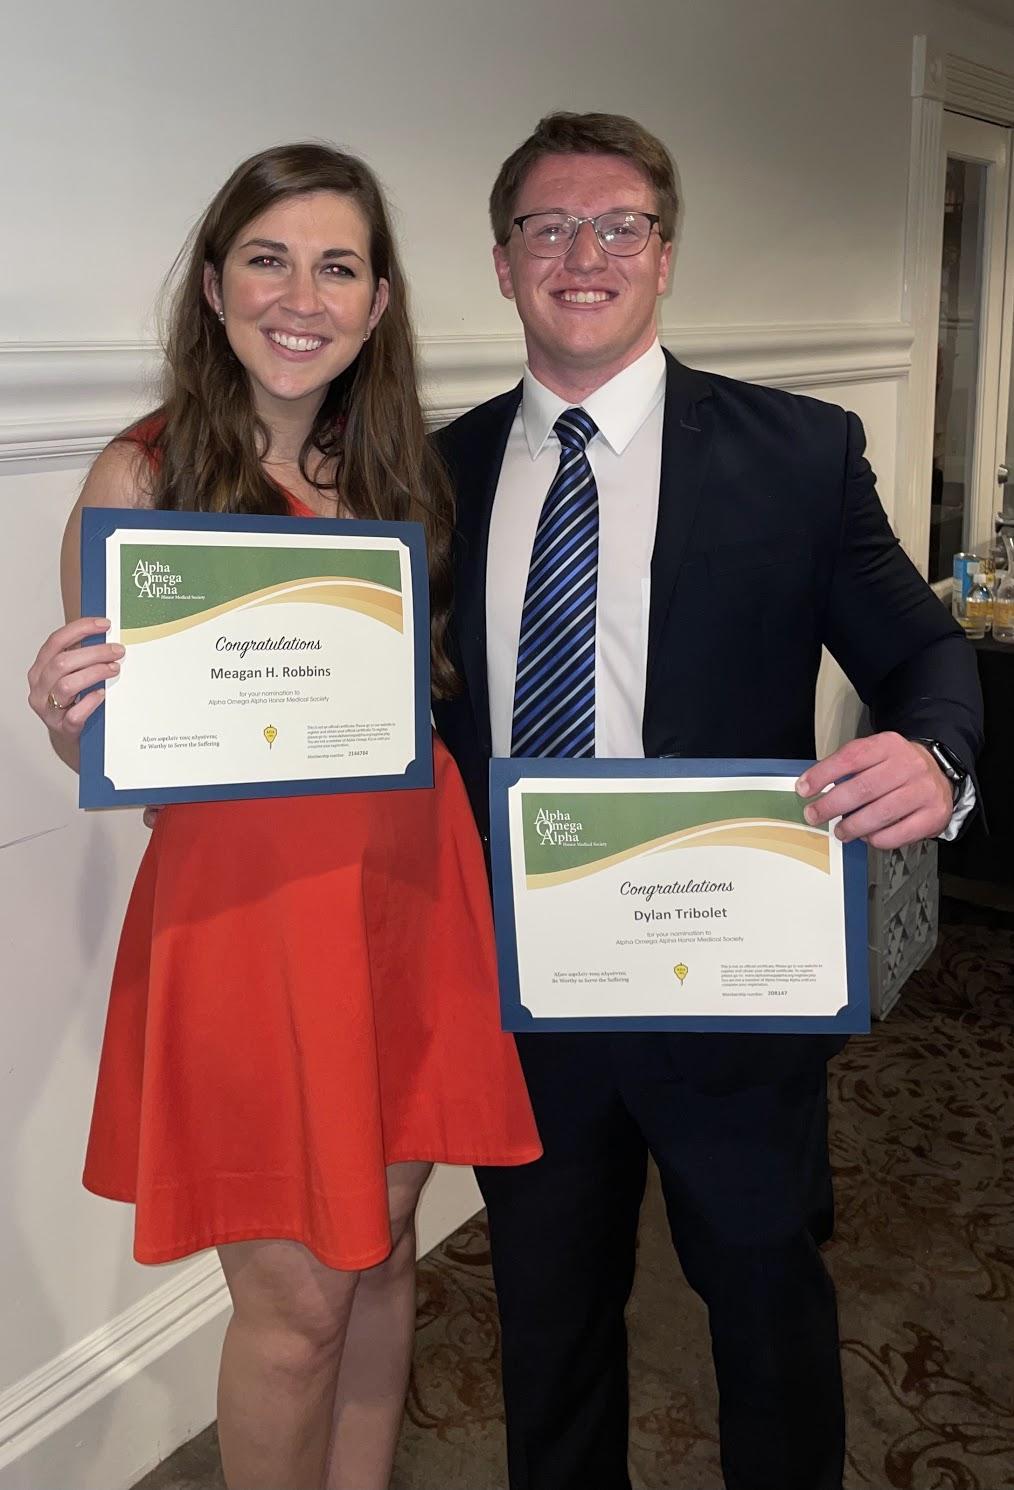 Meagan Robbins and Dylan Tribolet holding up their nomination certificates from the Alpha Omega Alpha Honor Medical Society.